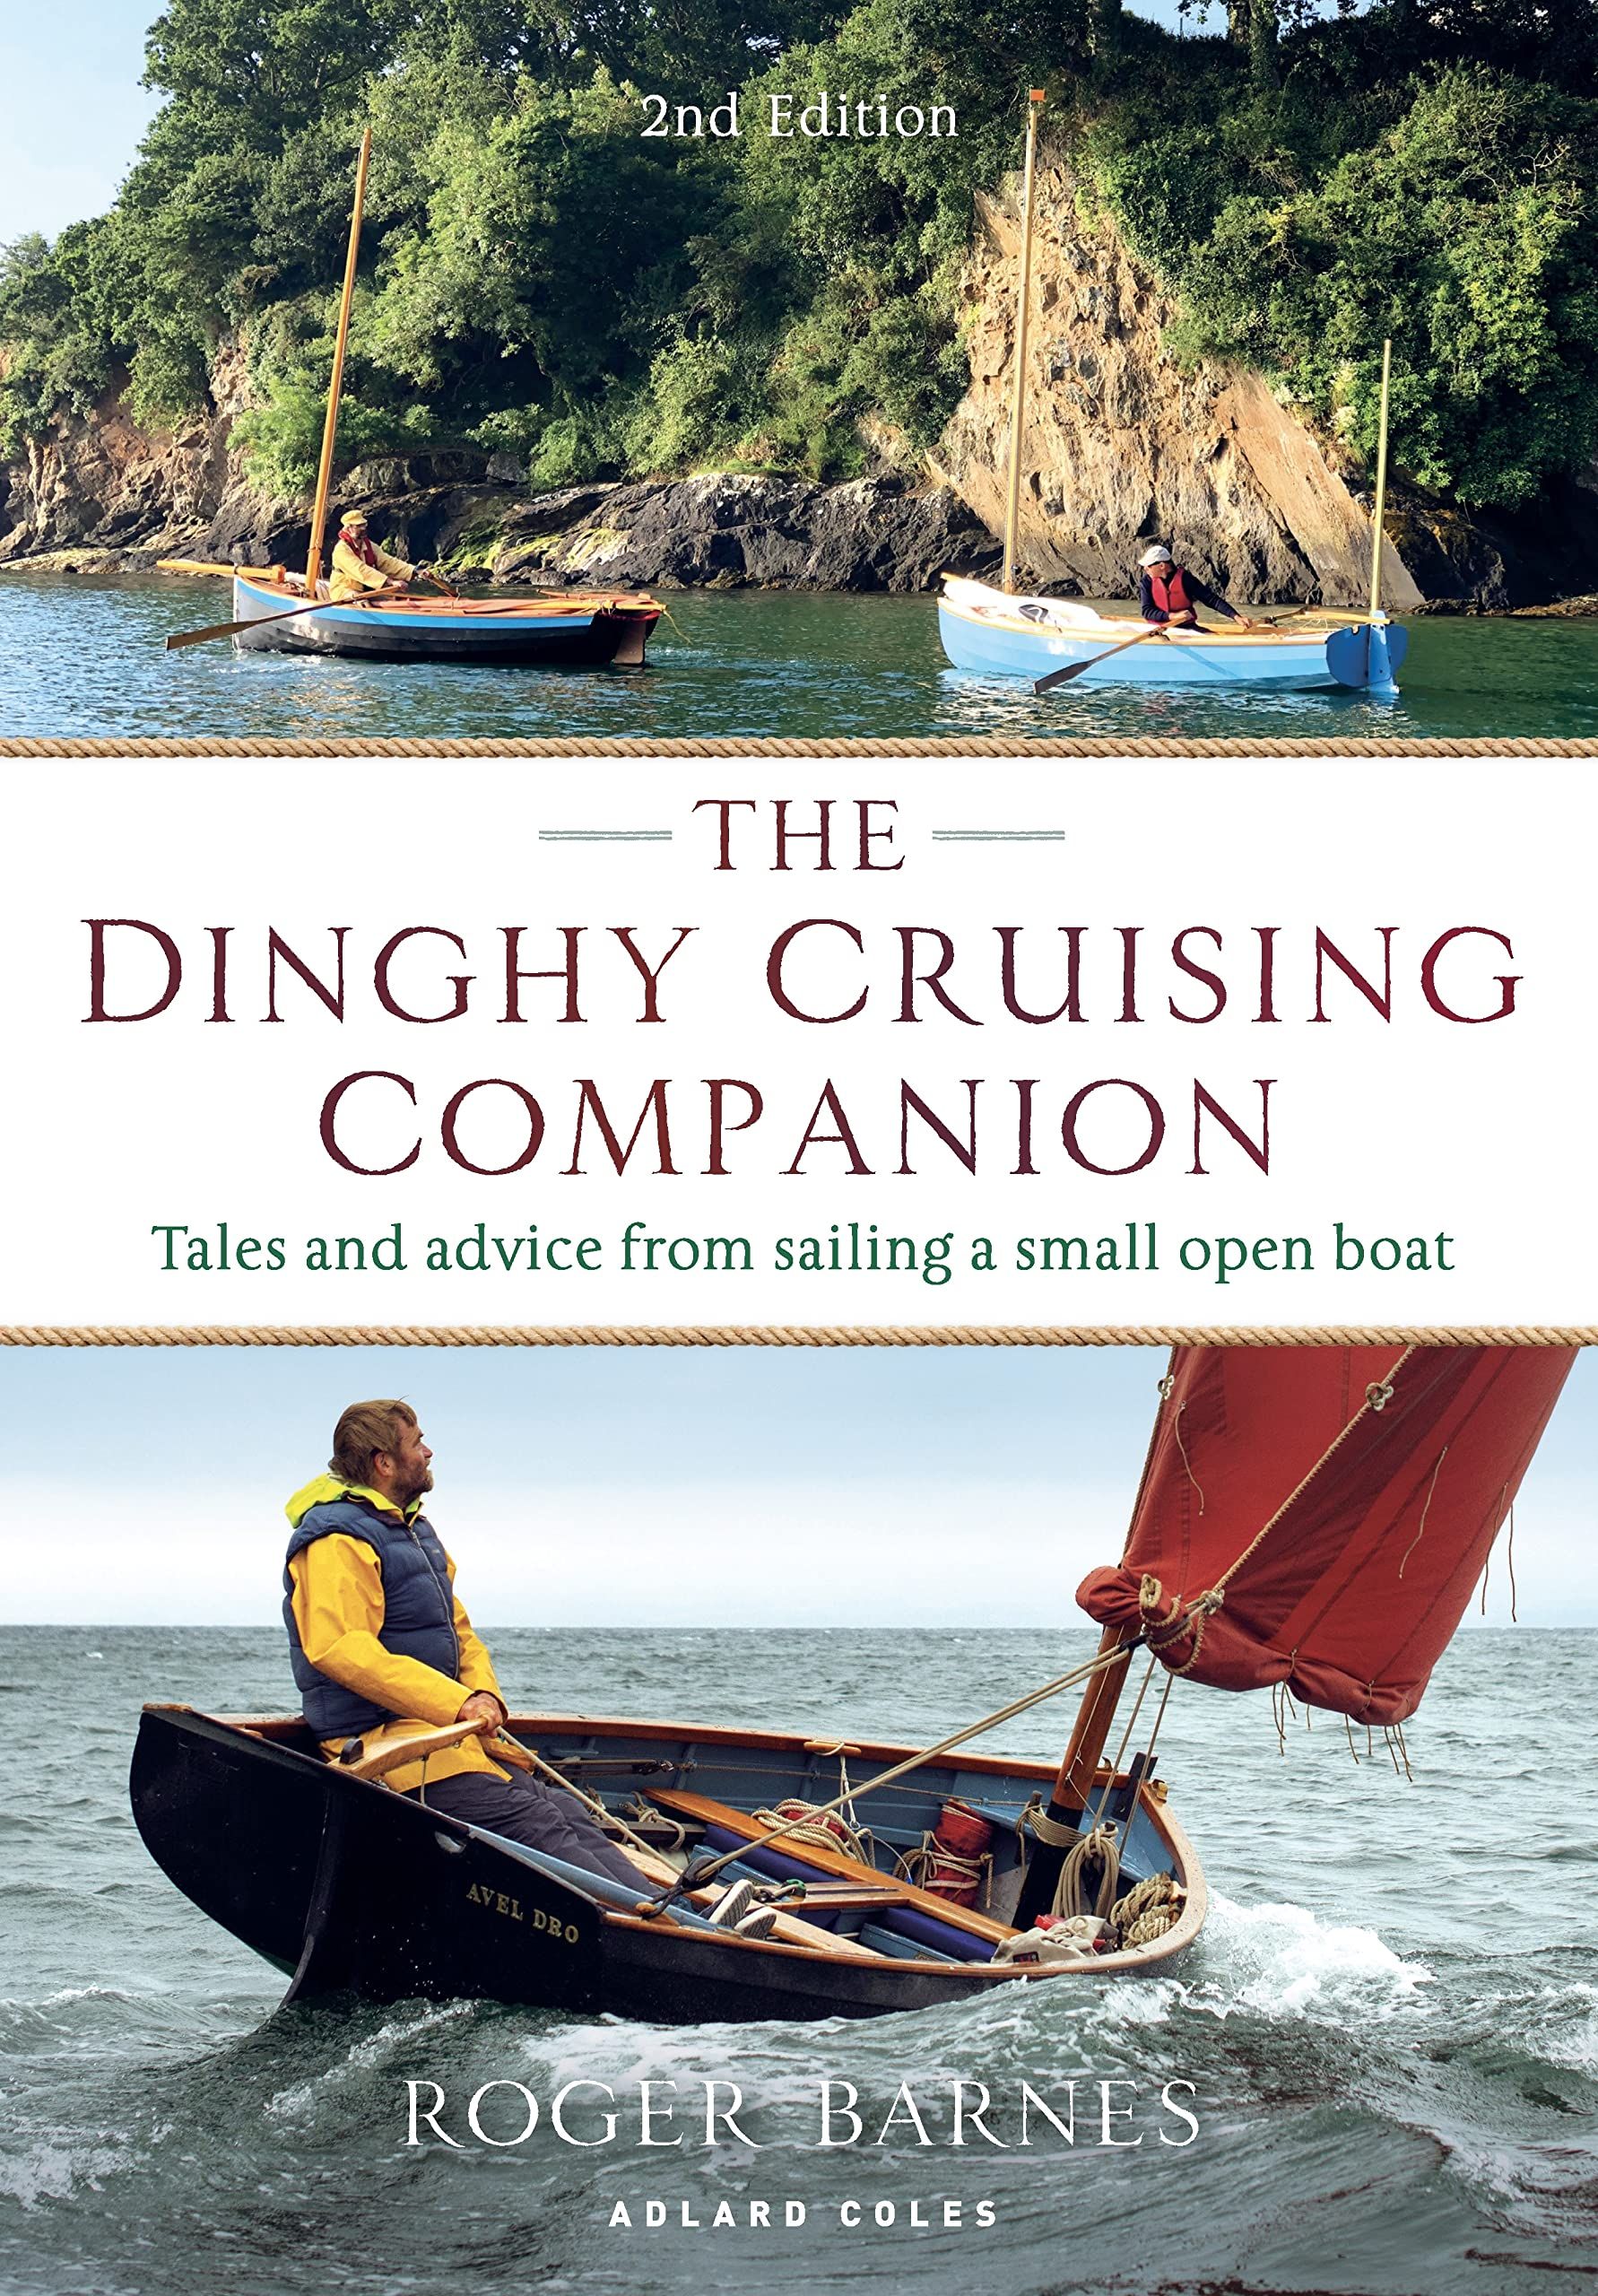 The Dinghy Cruising Companion 2nd edition : Tales and Advice from Sailing a Small Open Boat